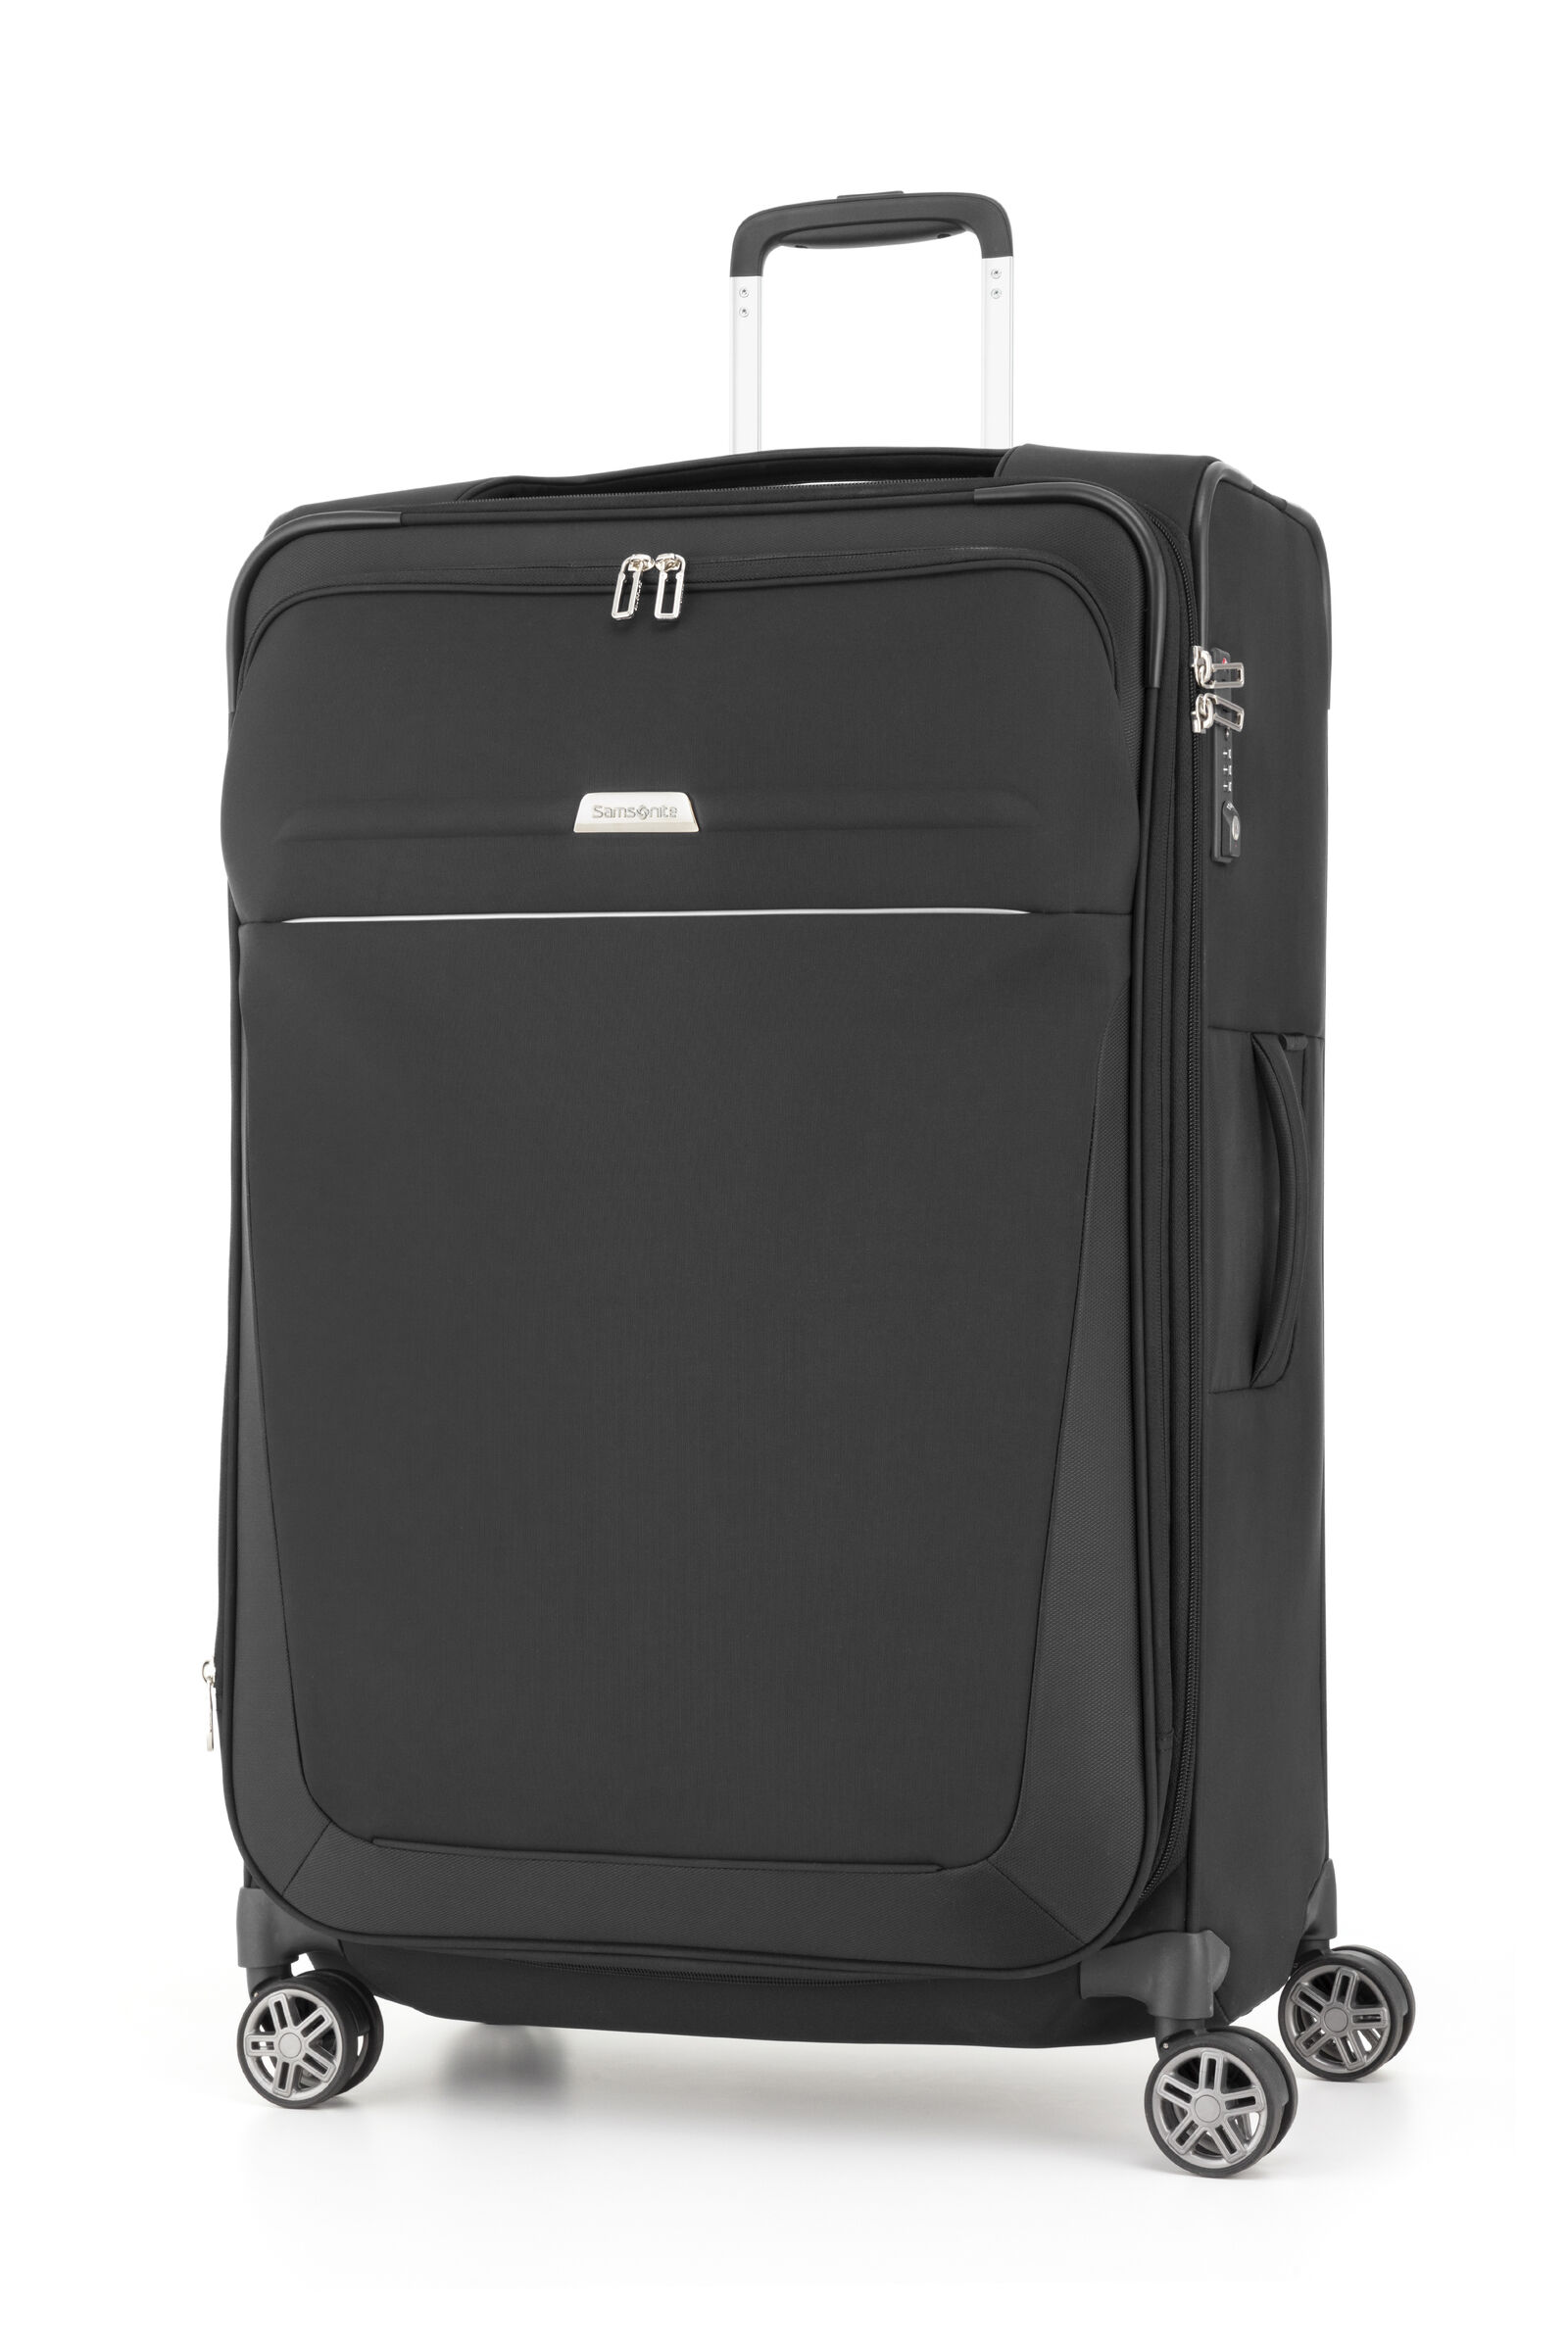 Samsonite Sirocco Collection 3 Piece Nested Spinner Expandable Luggage -  Canada Luggage Depot